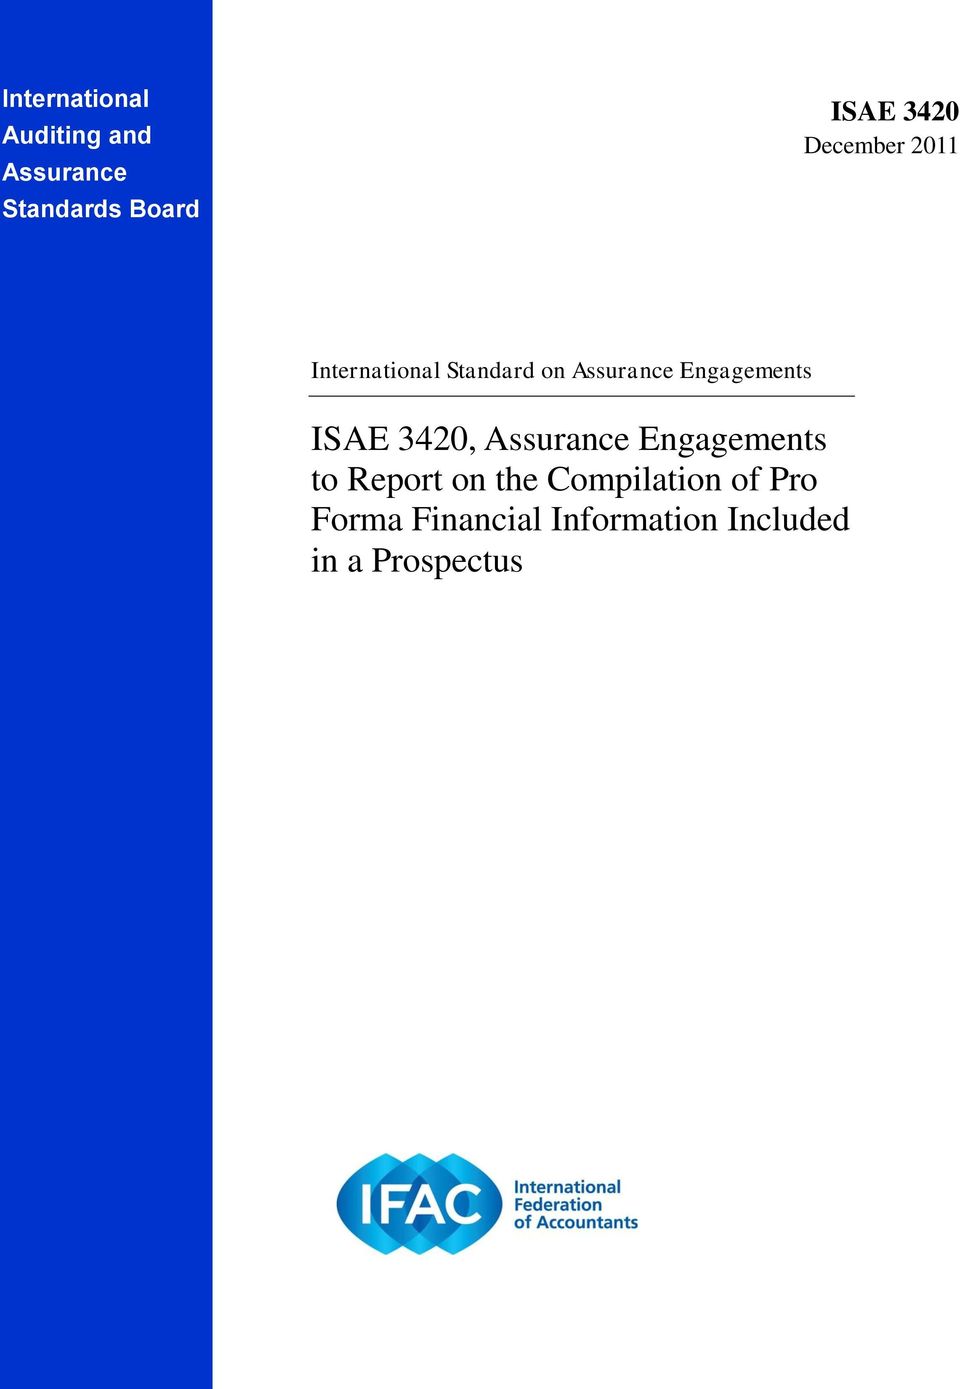 Engagements ISAE 3420, Assurance Engagements to Report on the